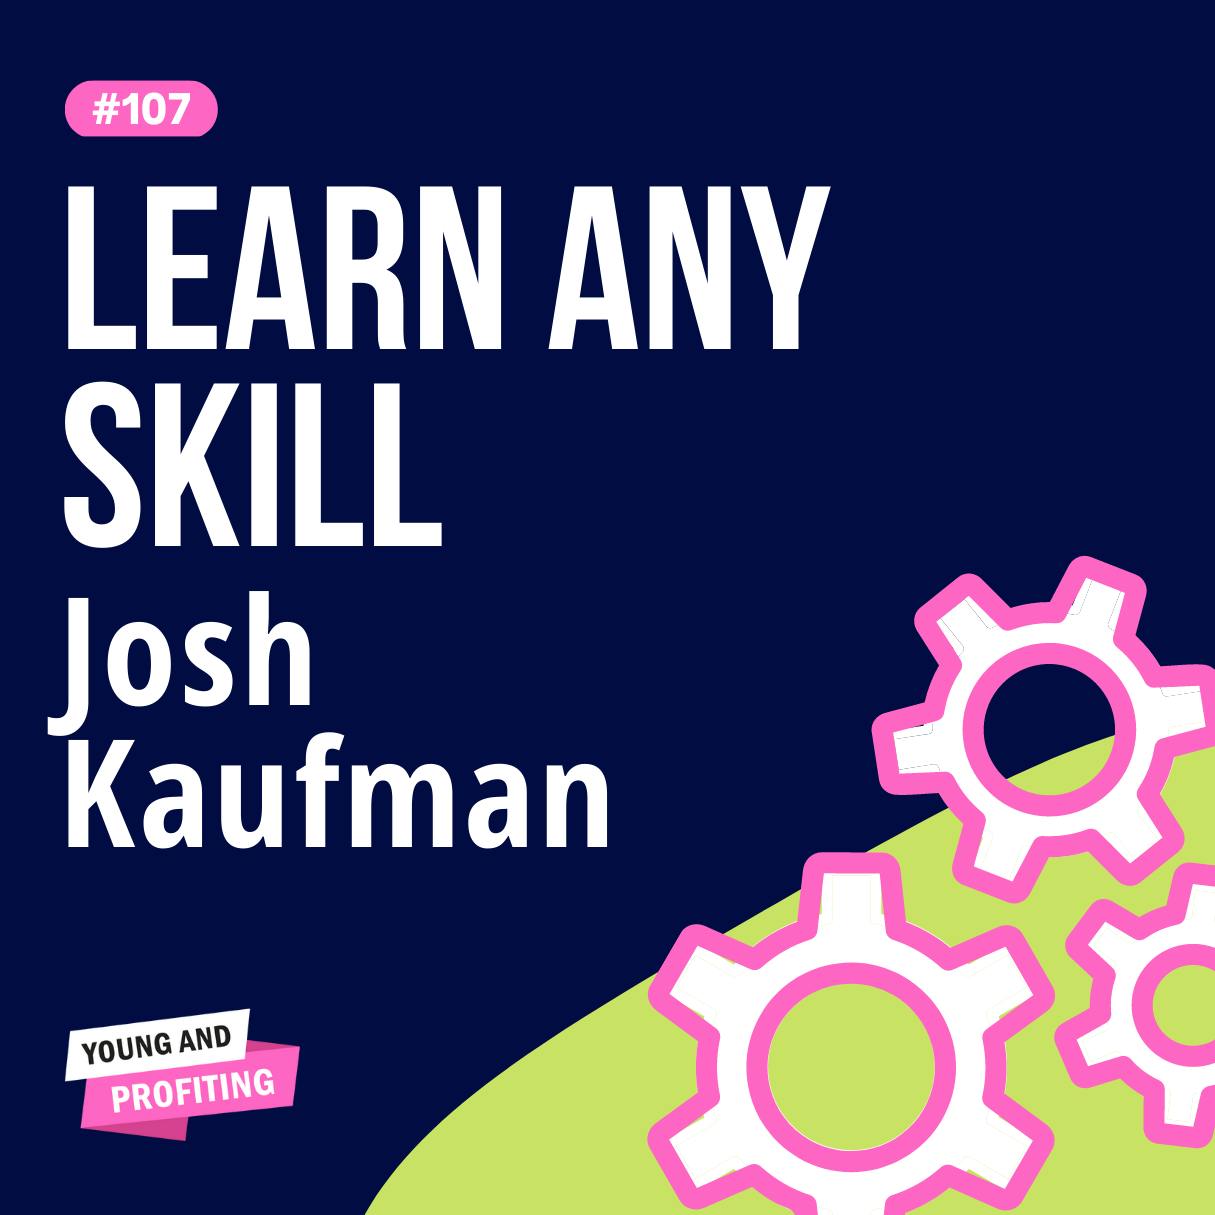 YAPClassic: Josh Kaufman Teaches How to Acquire Any Skill in Just 20 Hours by Hala Taha | YAP Media Network